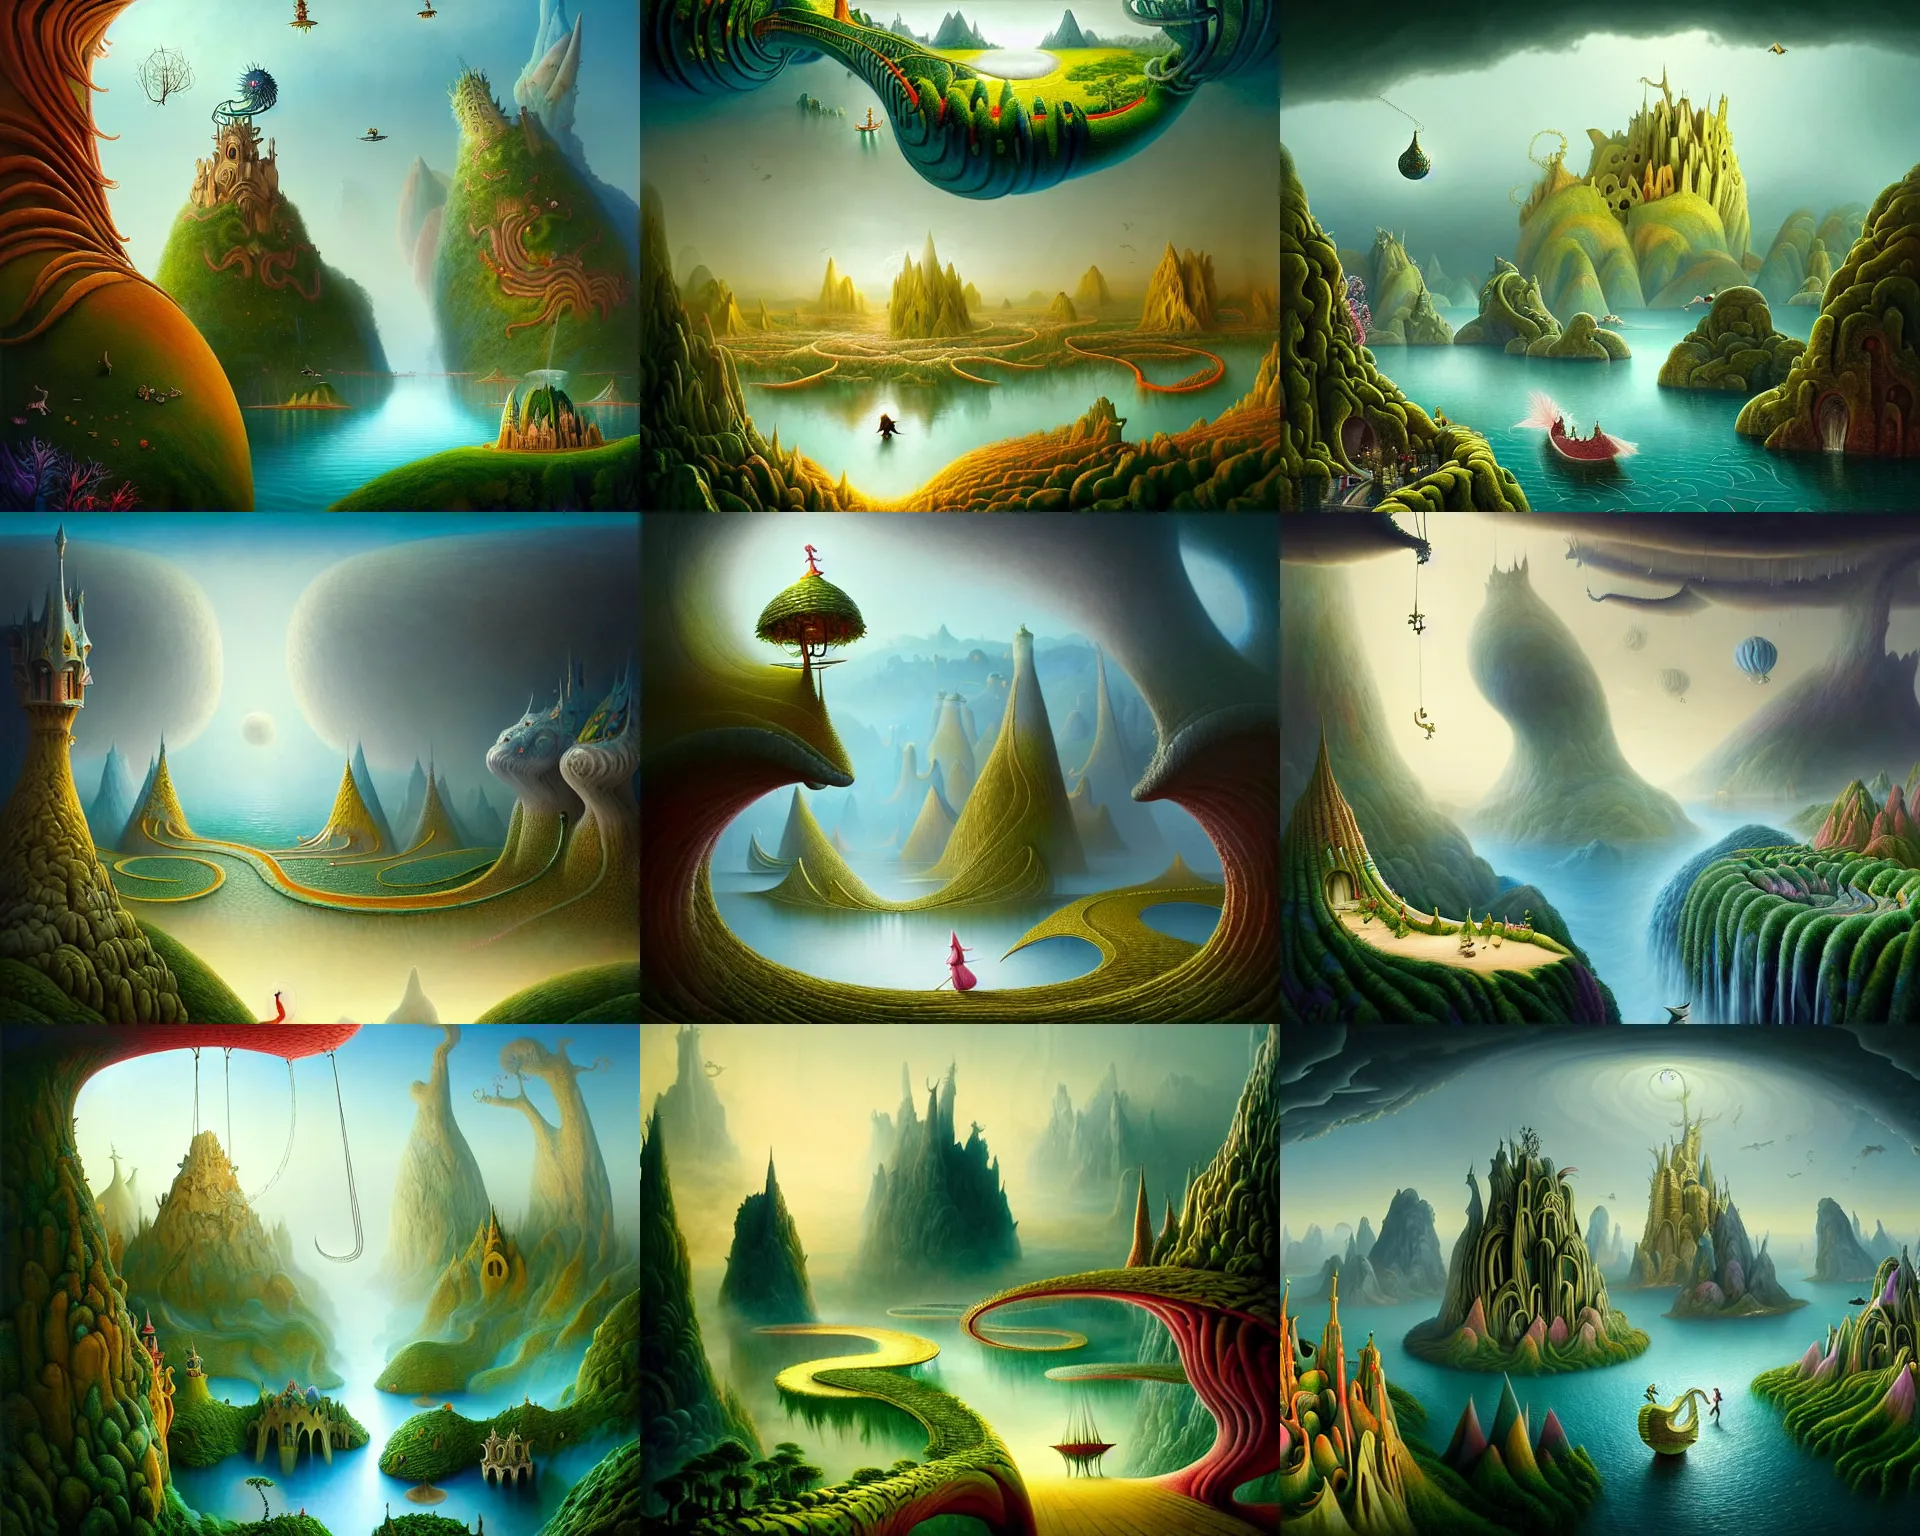 Prompt: a beguiling epic stunning beautiful and insanely detailed matte painting of the impossible winding path through a dream world with surreal architecture designed by Heironymous Bosch, mythical whimsical creatures, mega structures inspired by Heironymous Bosch's Garden of Earthly Delights, vast surreal landscape and horizon by Asher Durand and Cyril Rolando and Andrew Ferez, masterpiece!!!, grand!, imaginative!!!, whimsical!!, epic scale, intricate details, sense of awe, elite, wonder, insanely complex, masterful composition!!!, sharp focus, fantasy realism, dramatic lighting